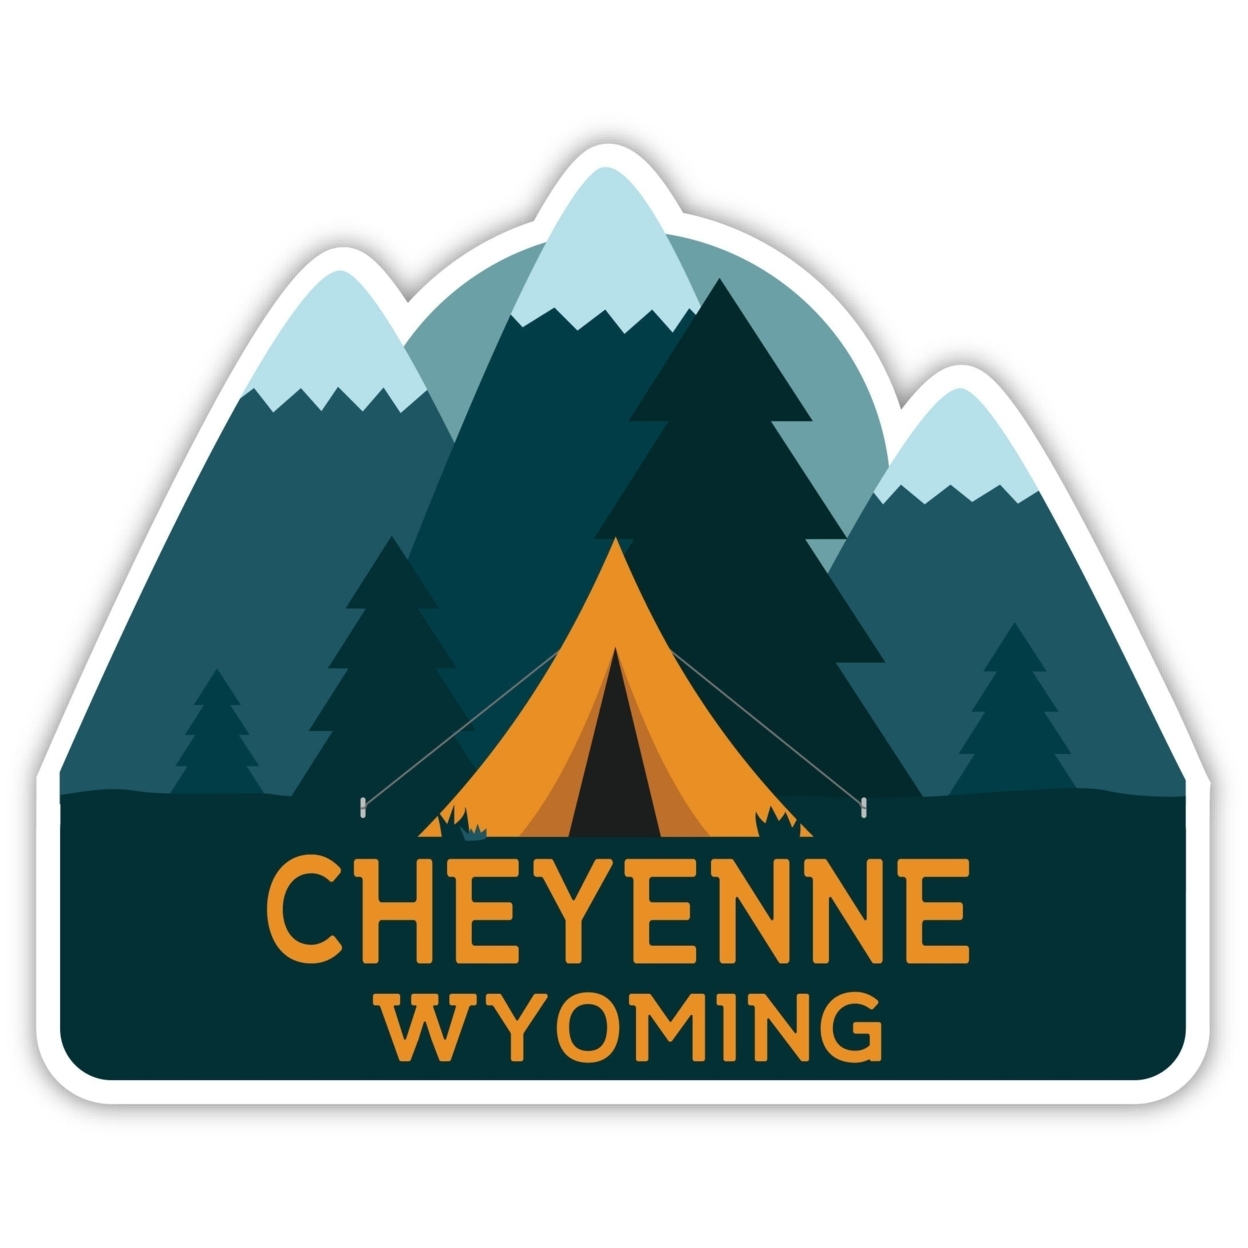 Cheyenne Wyoming Souvenir Decorative Stickers (Choose Theme And Size) - Single Unit, 4-Inch, Tent